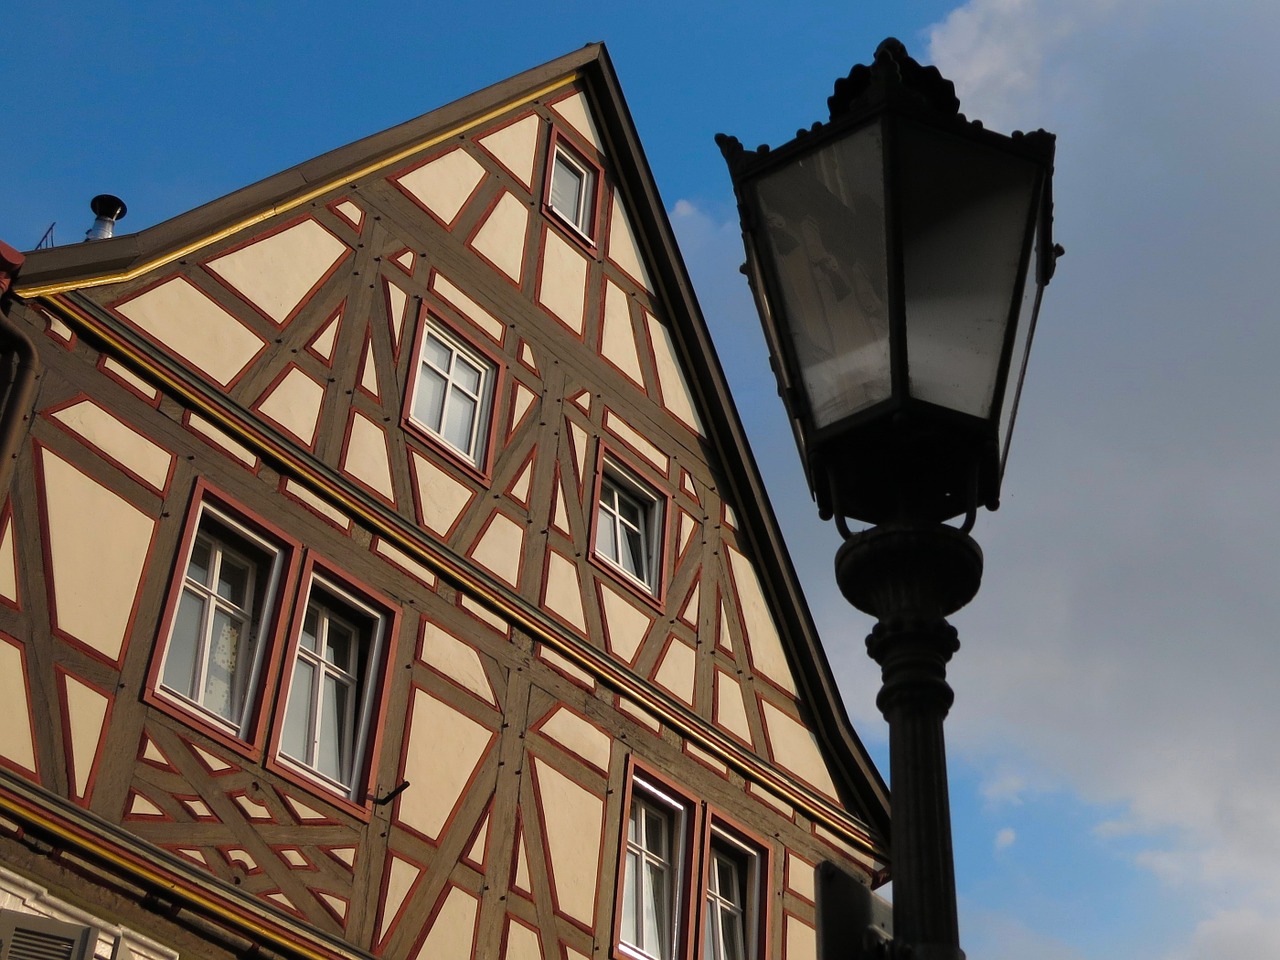 lantern timber framed house old town free photo